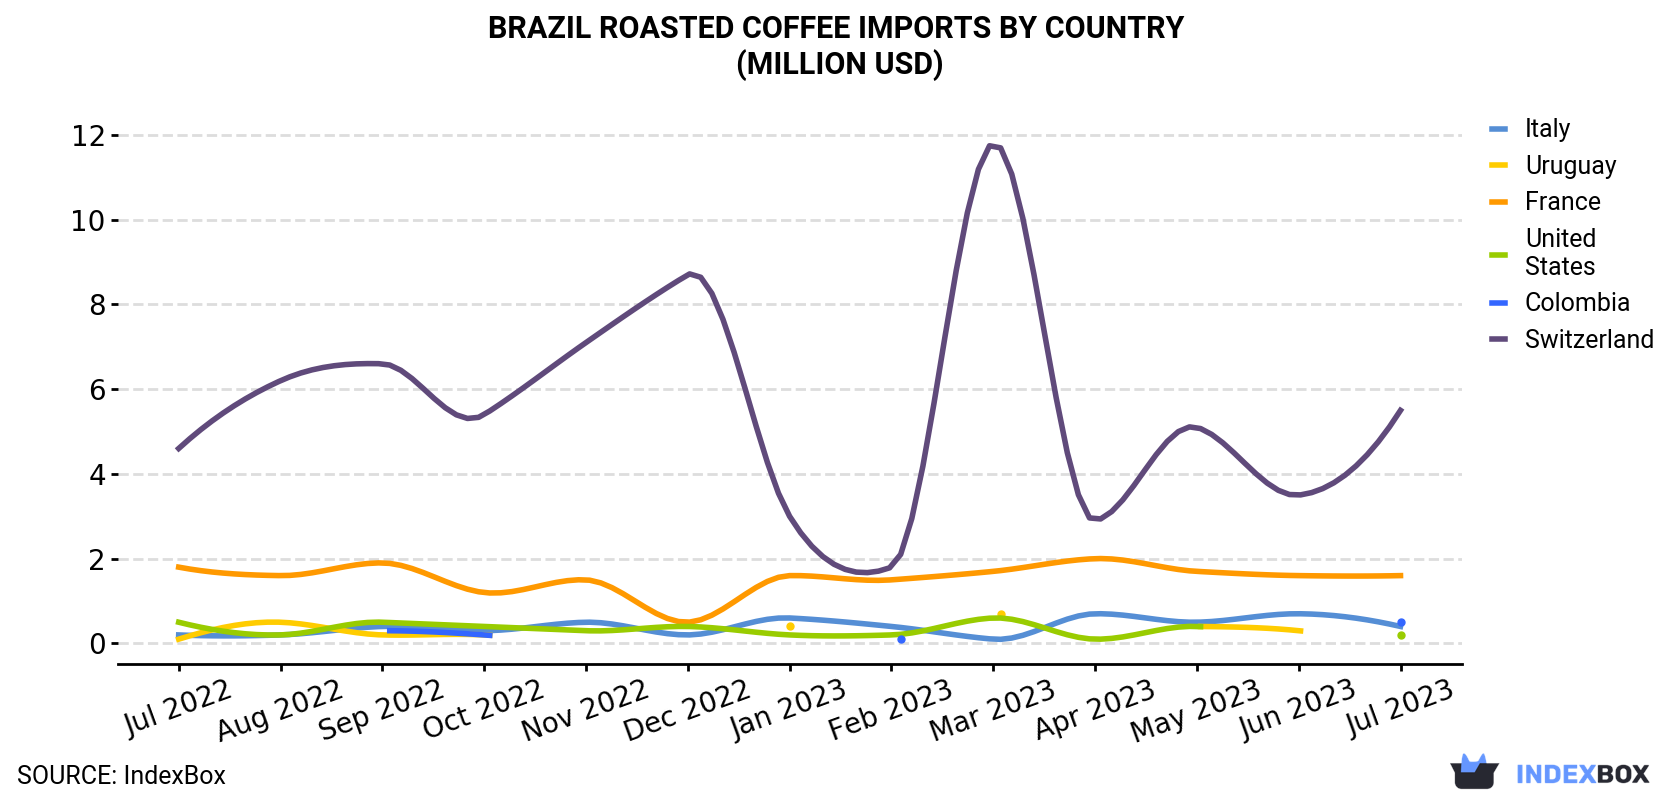 Brazil Roasted Coffee Imports By Country (Million USD)